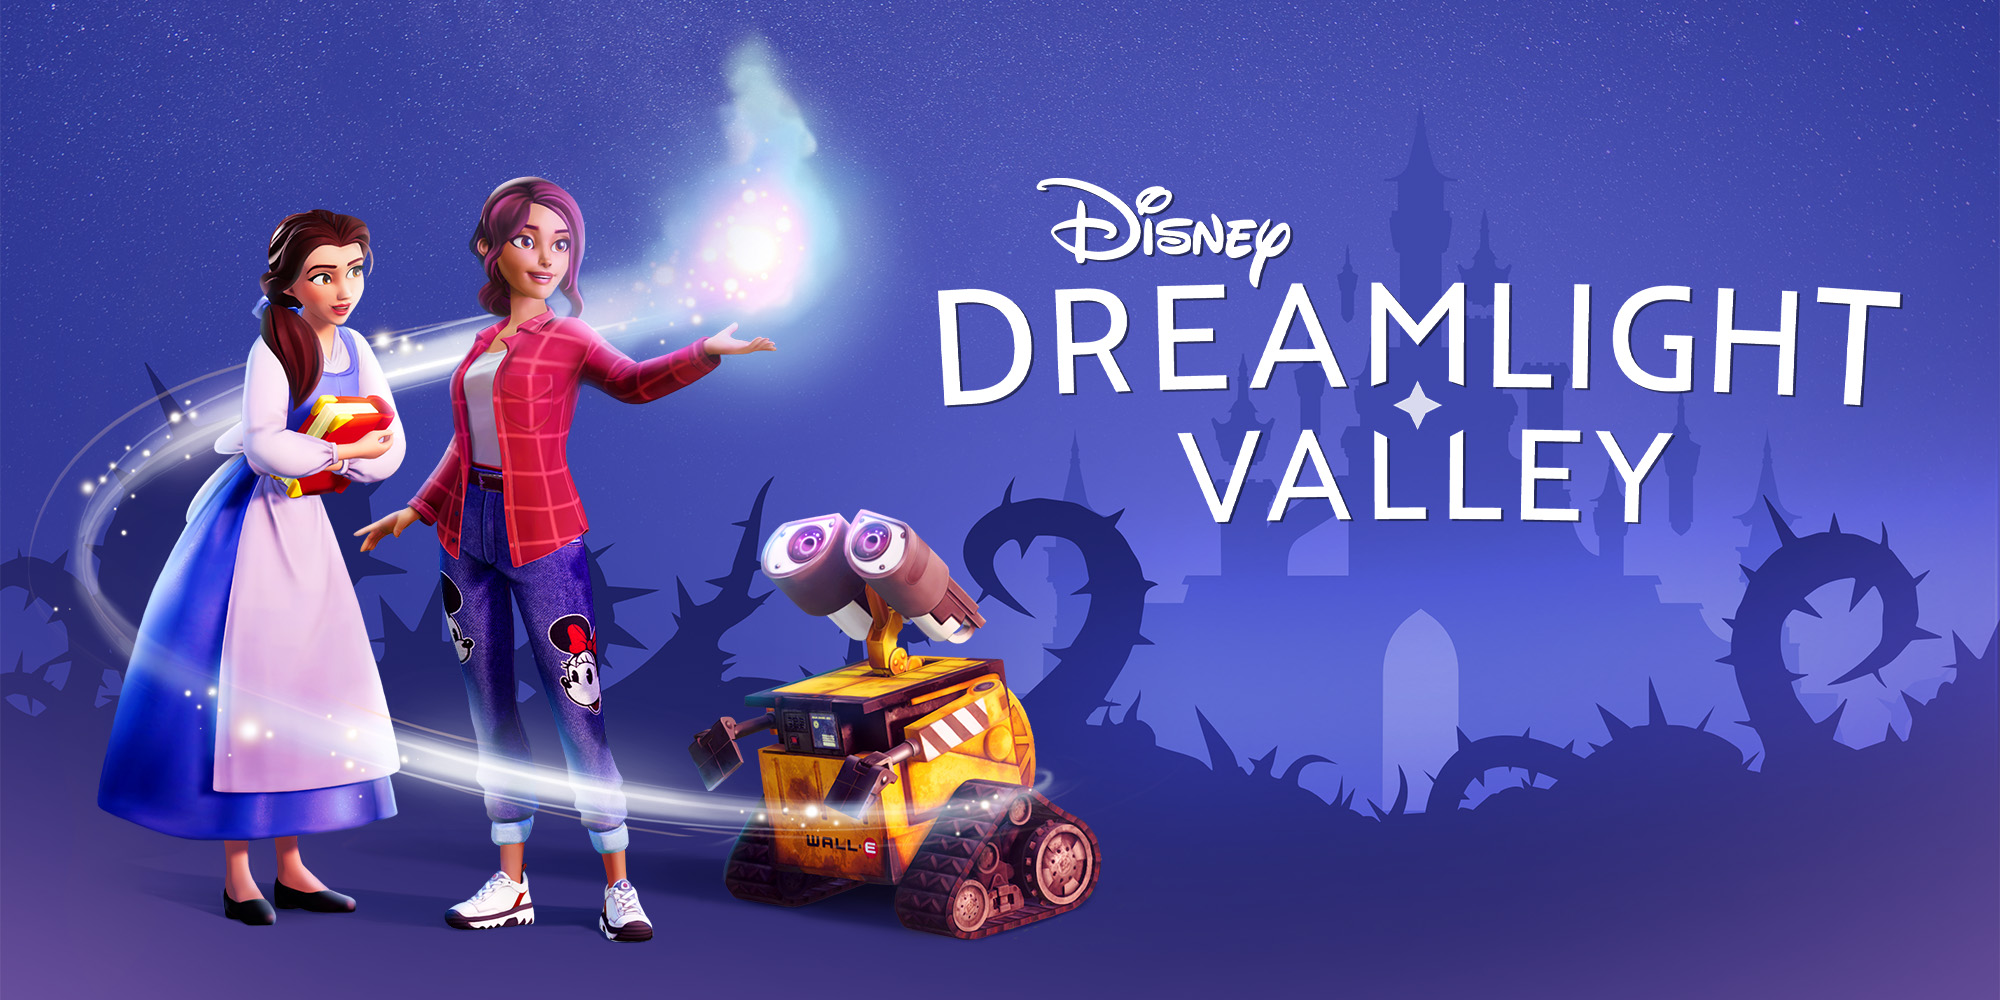 The cover of the video game - Disney Dreamlight Valley